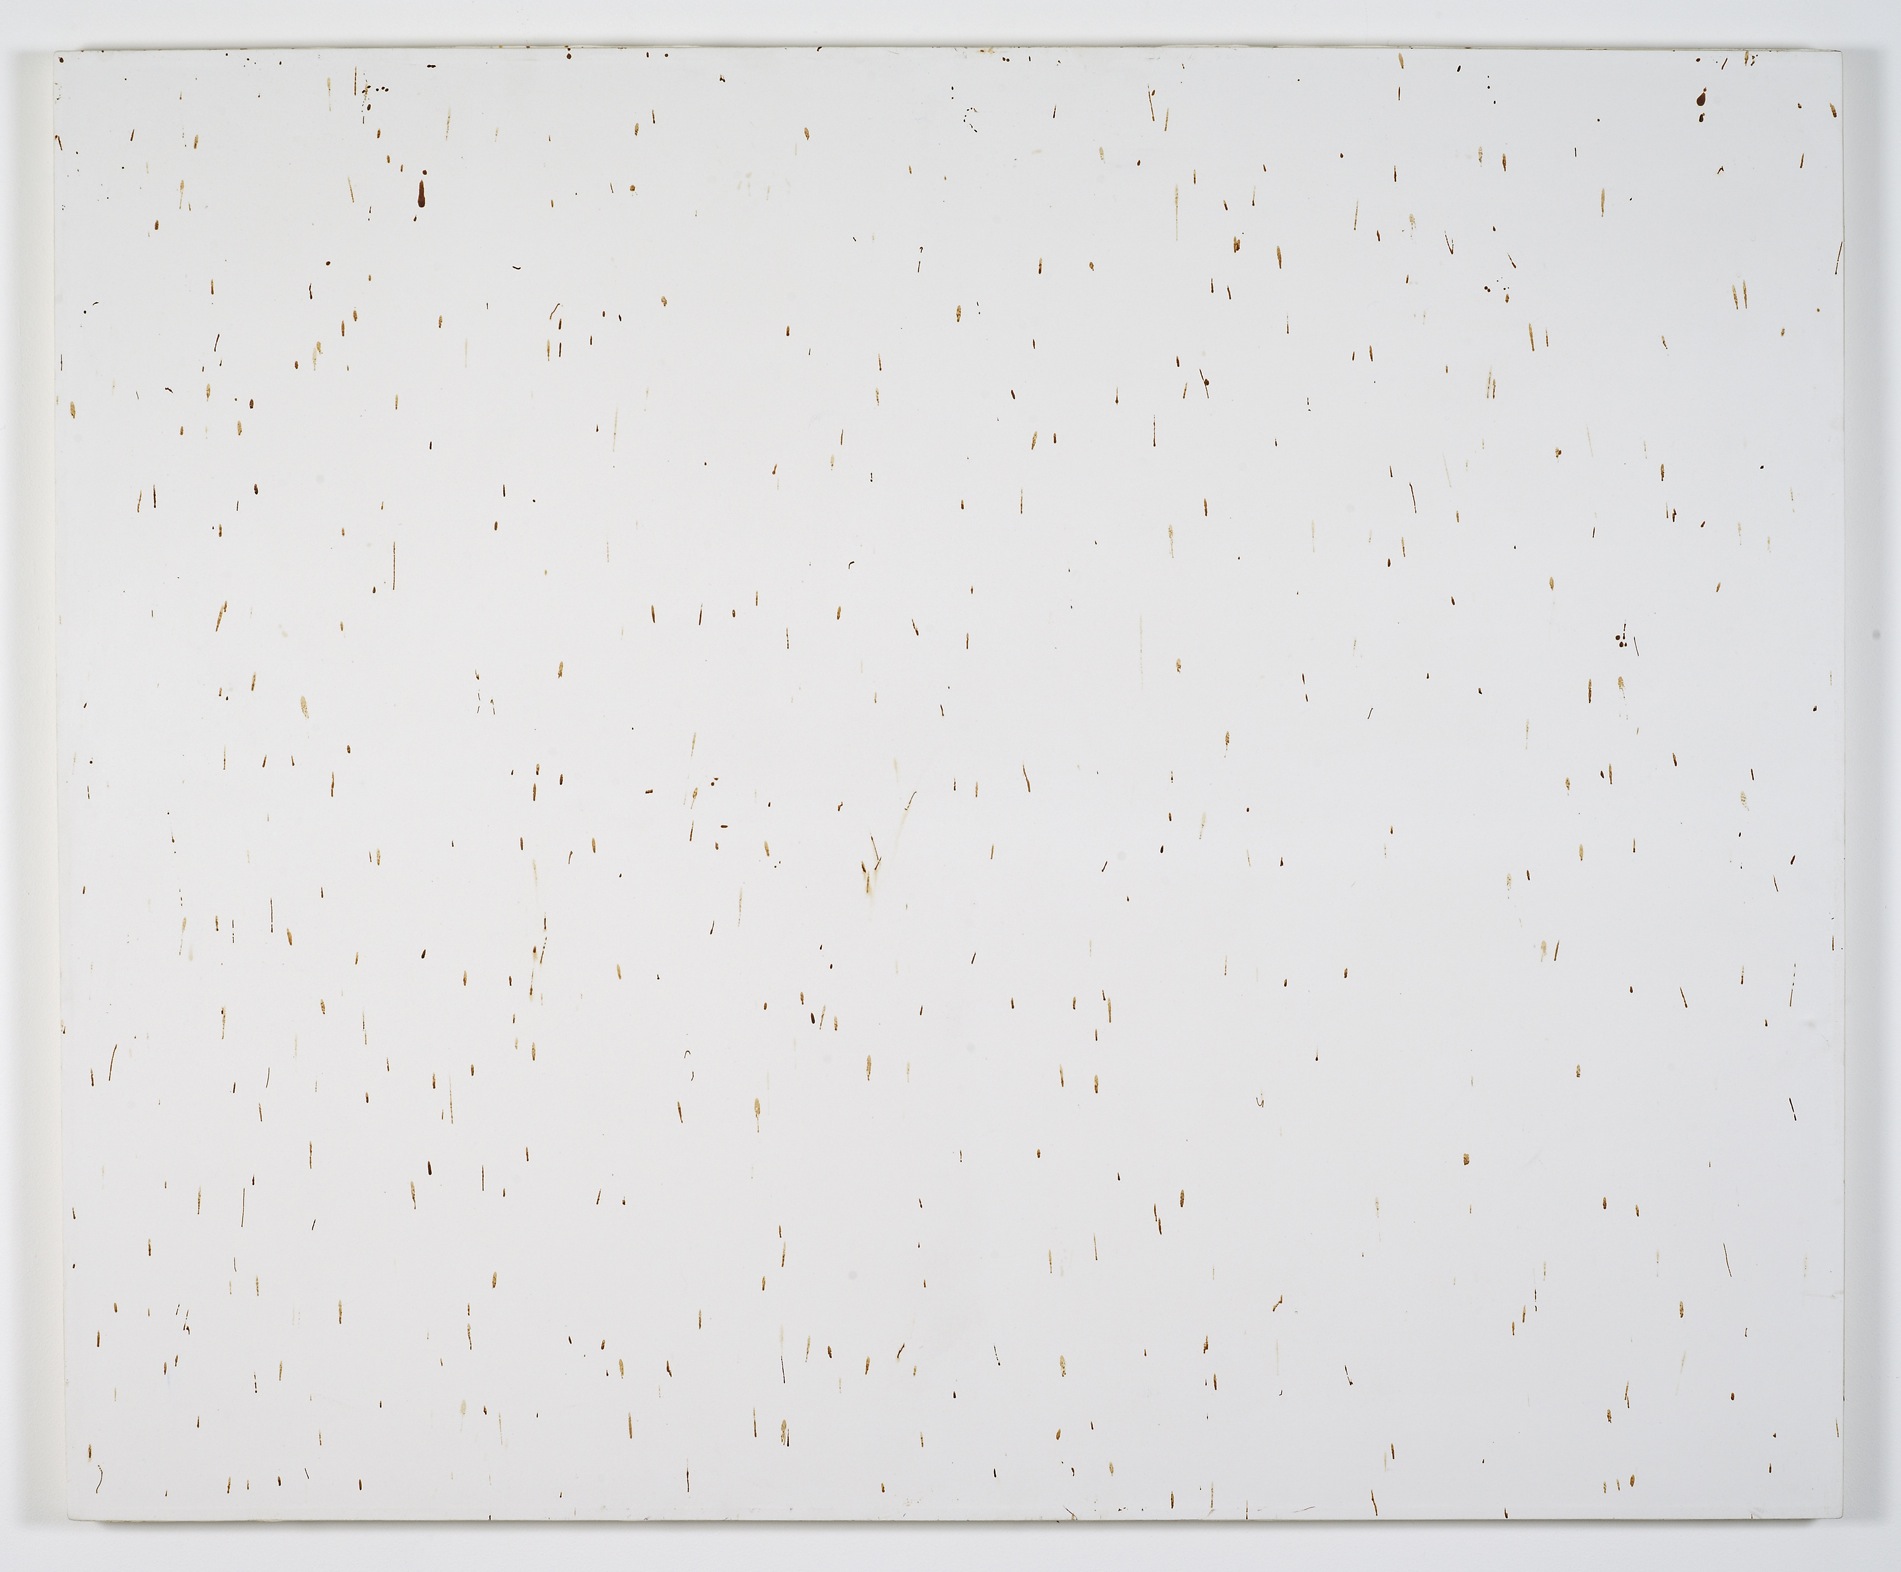      Bee Painting, Large Screen III   2009   Bee droppings on grounded canvas   148 x 120 cm  